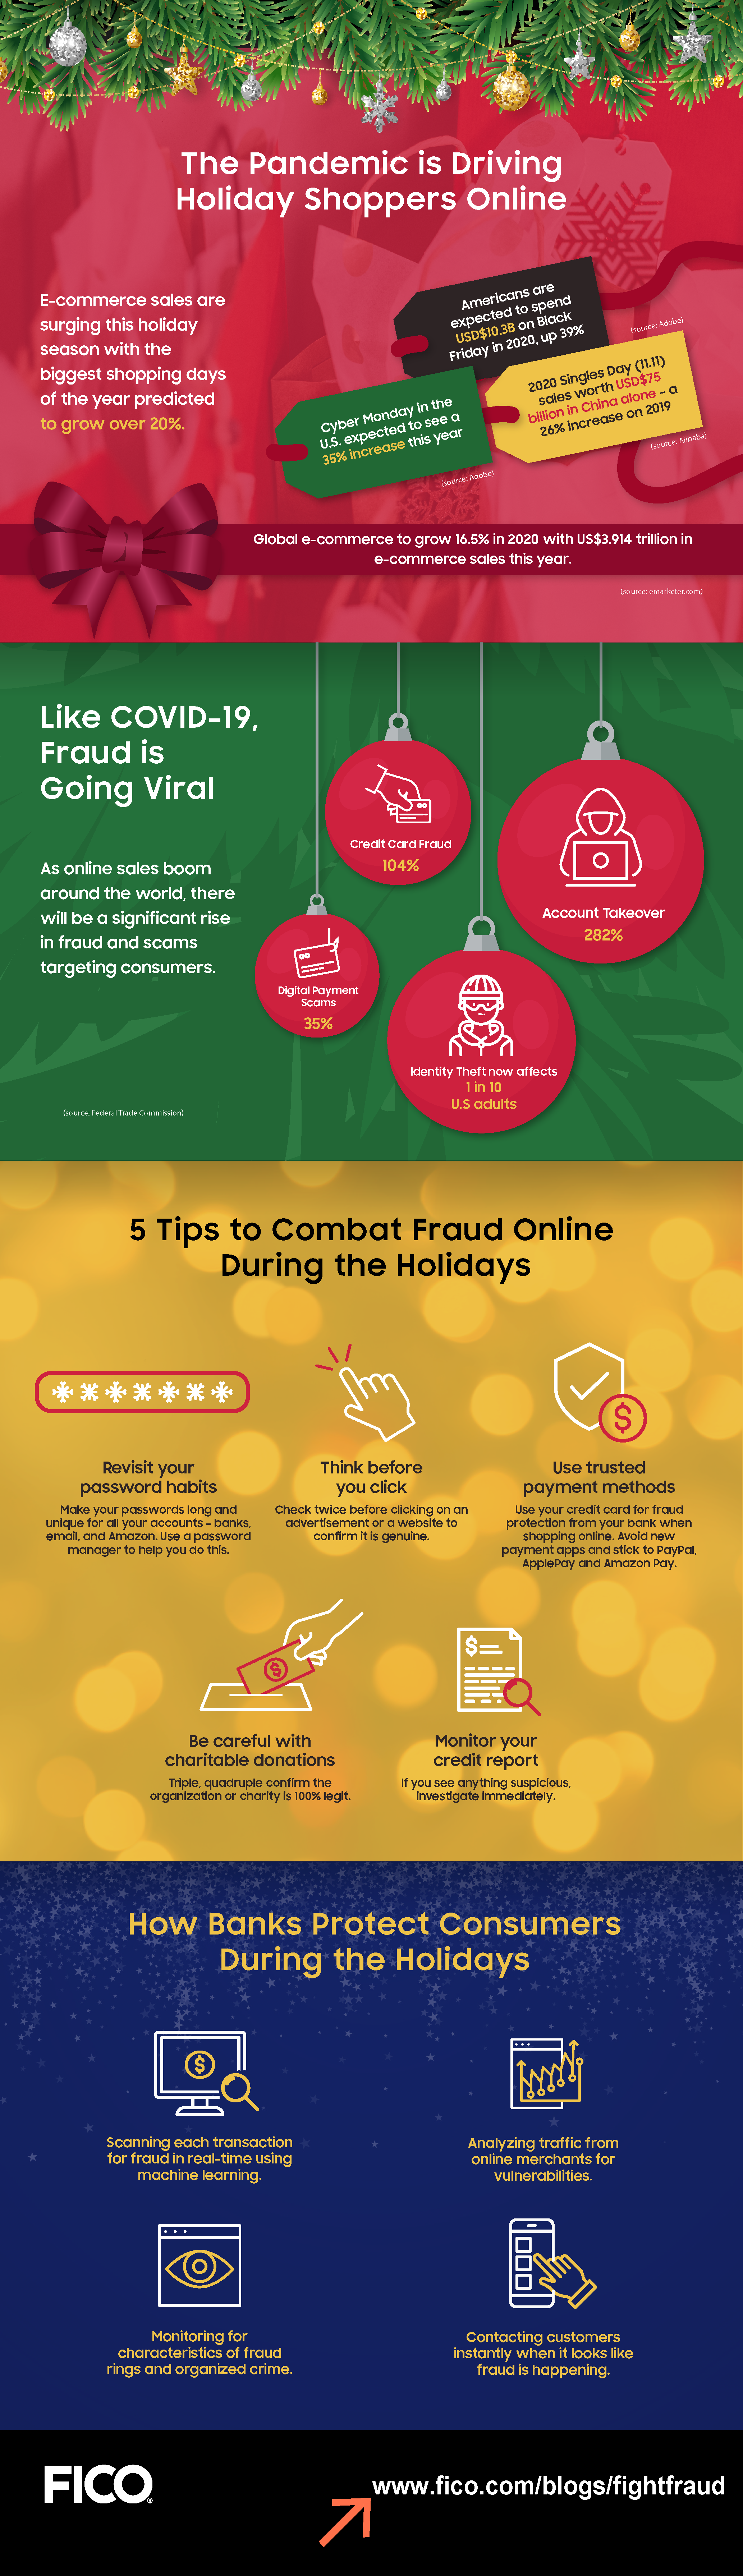 FICO Holiday Fraud Infographic 2020